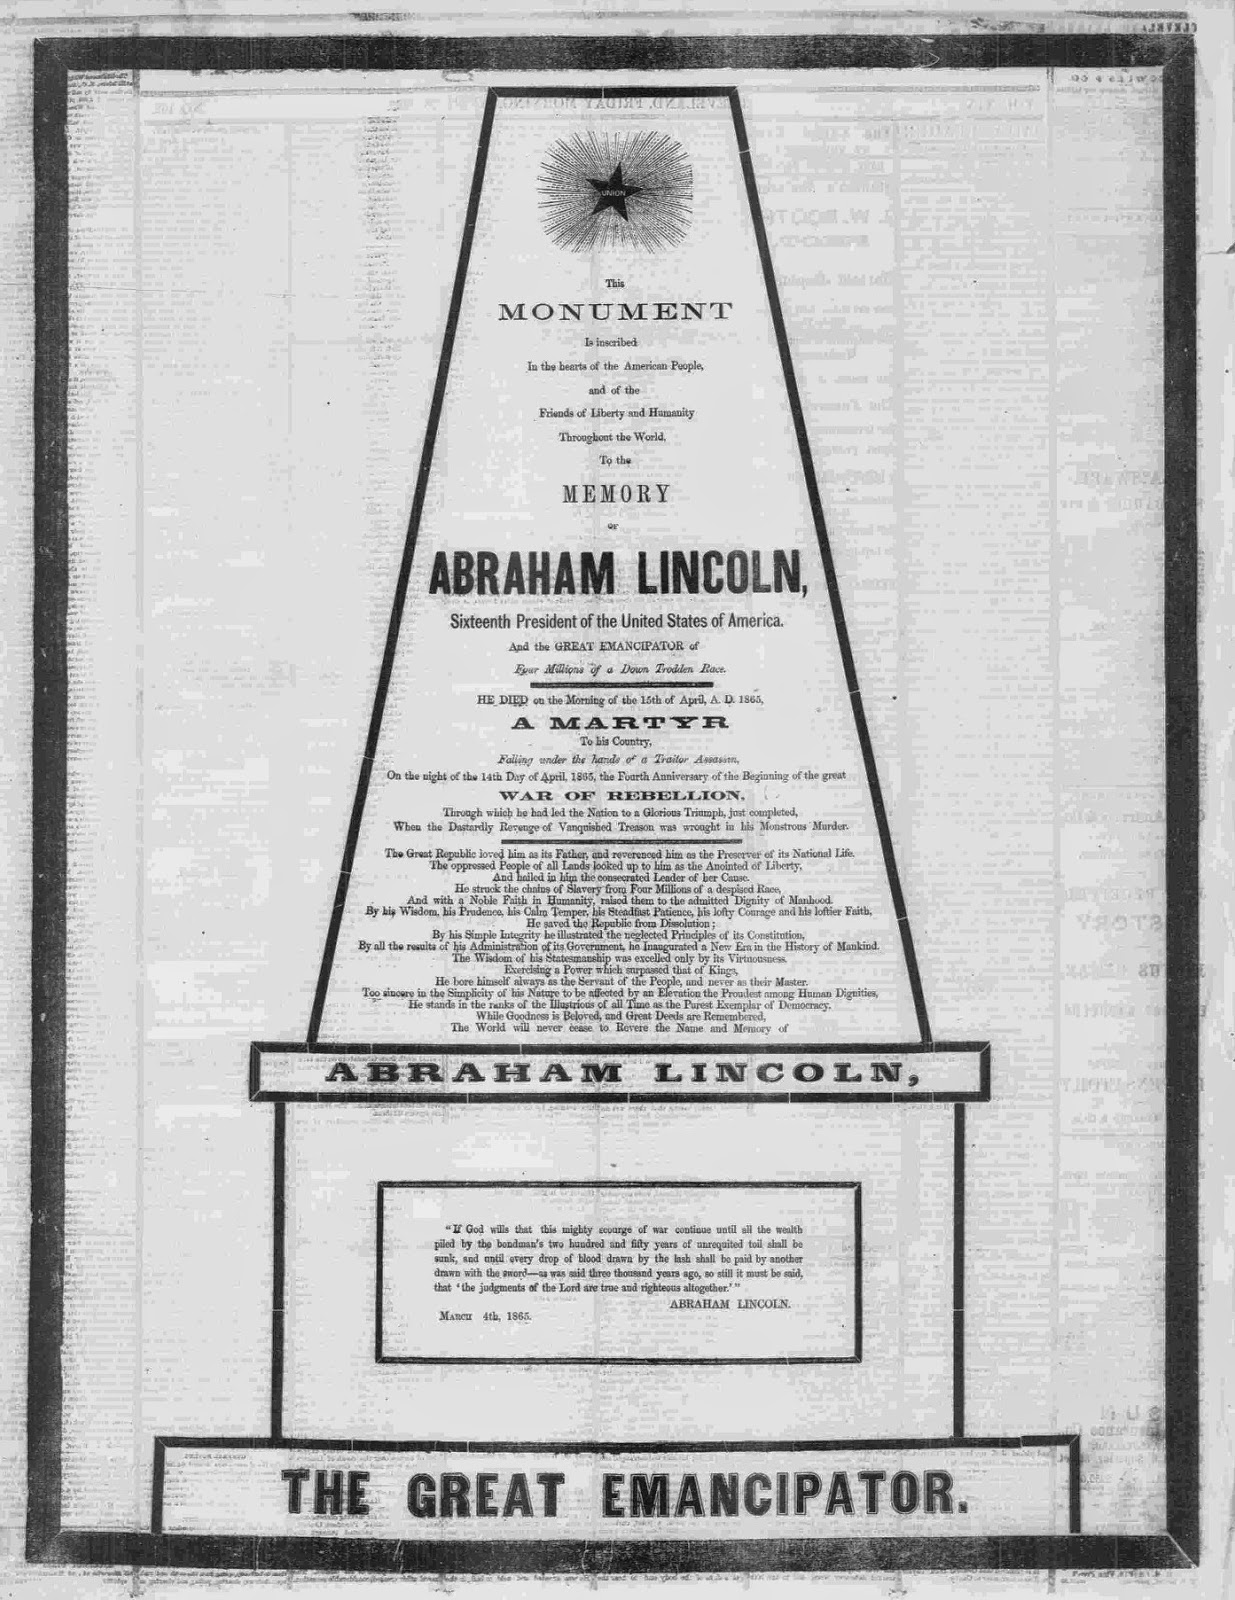 Abraham Lincoln's Funeral